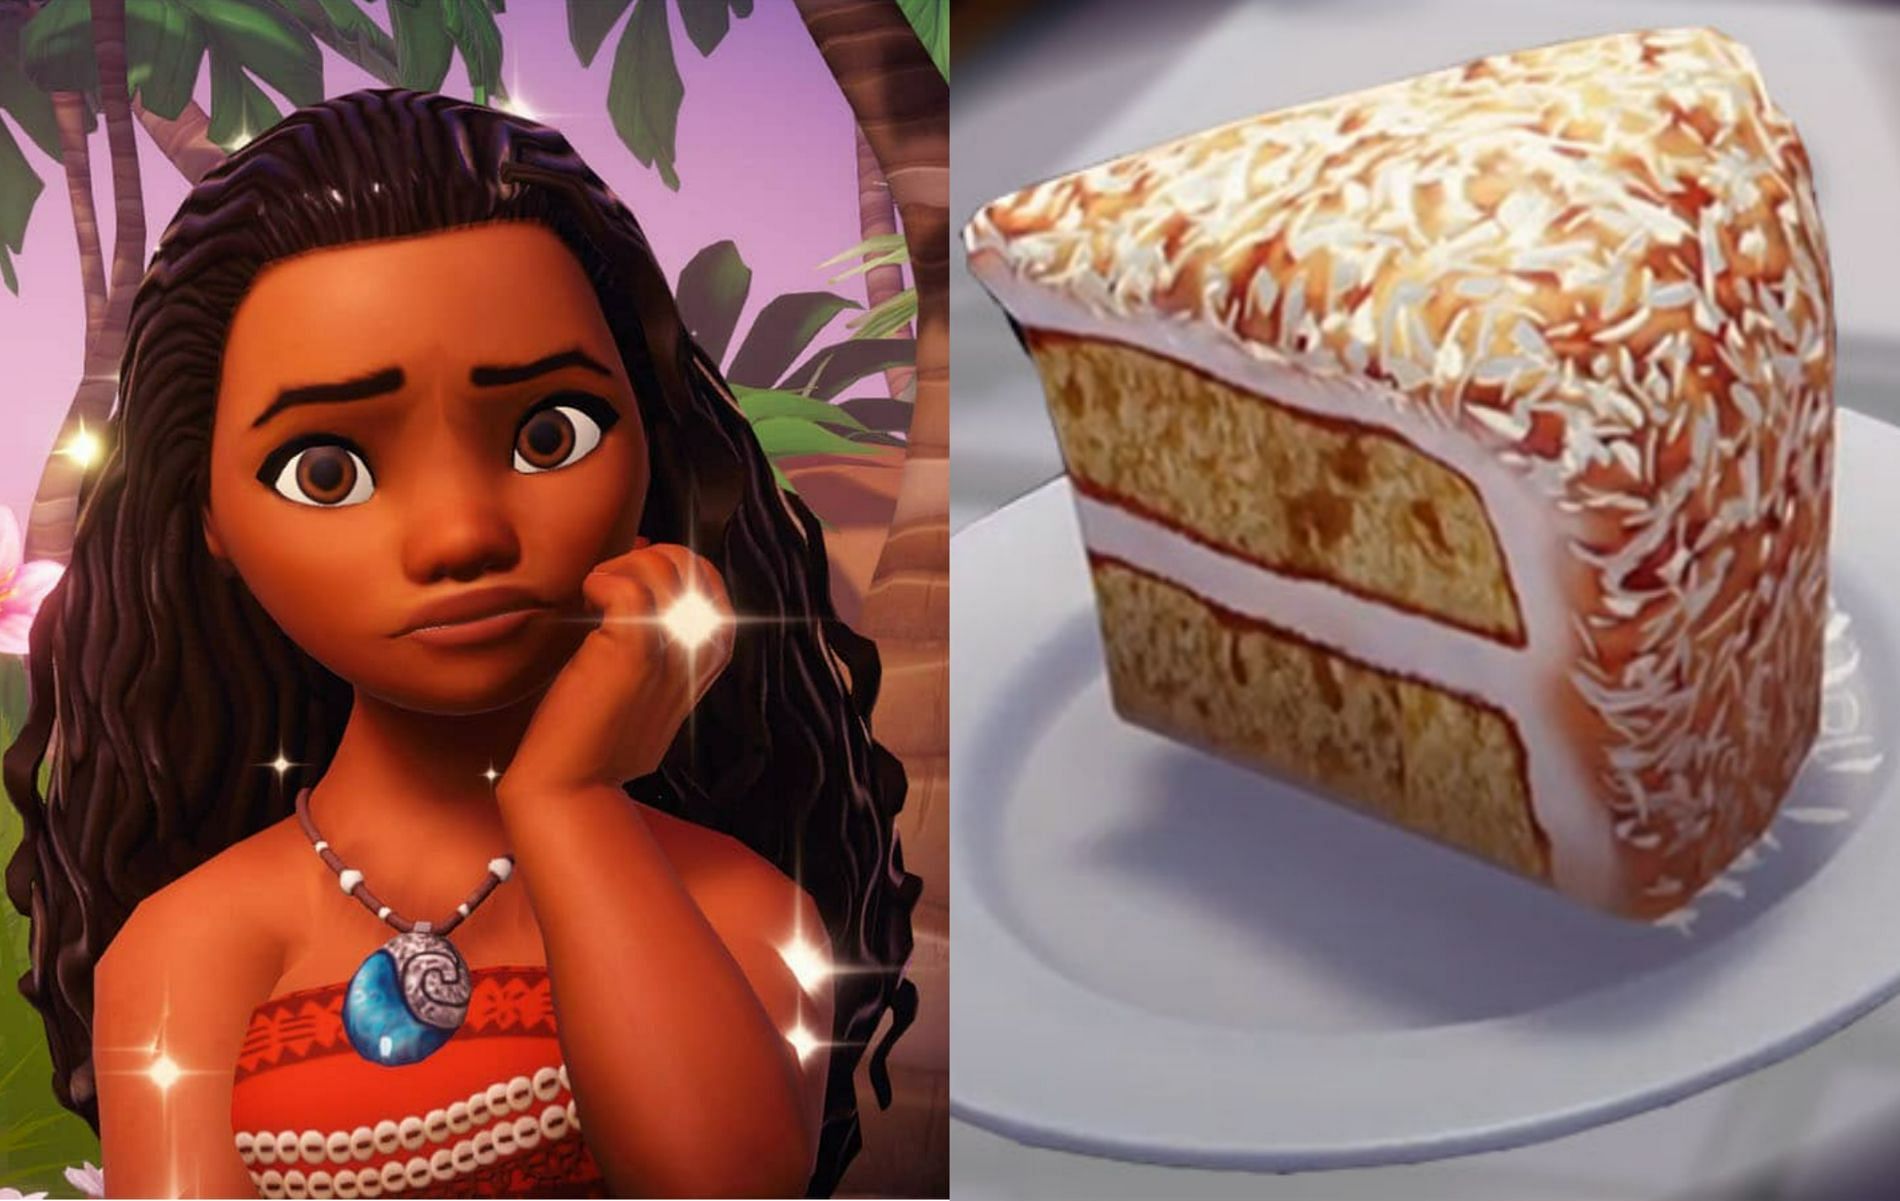 Cooking Coconut Cake in Disney Dreamlight Valley (Images via Disney Dreamlight Valley)